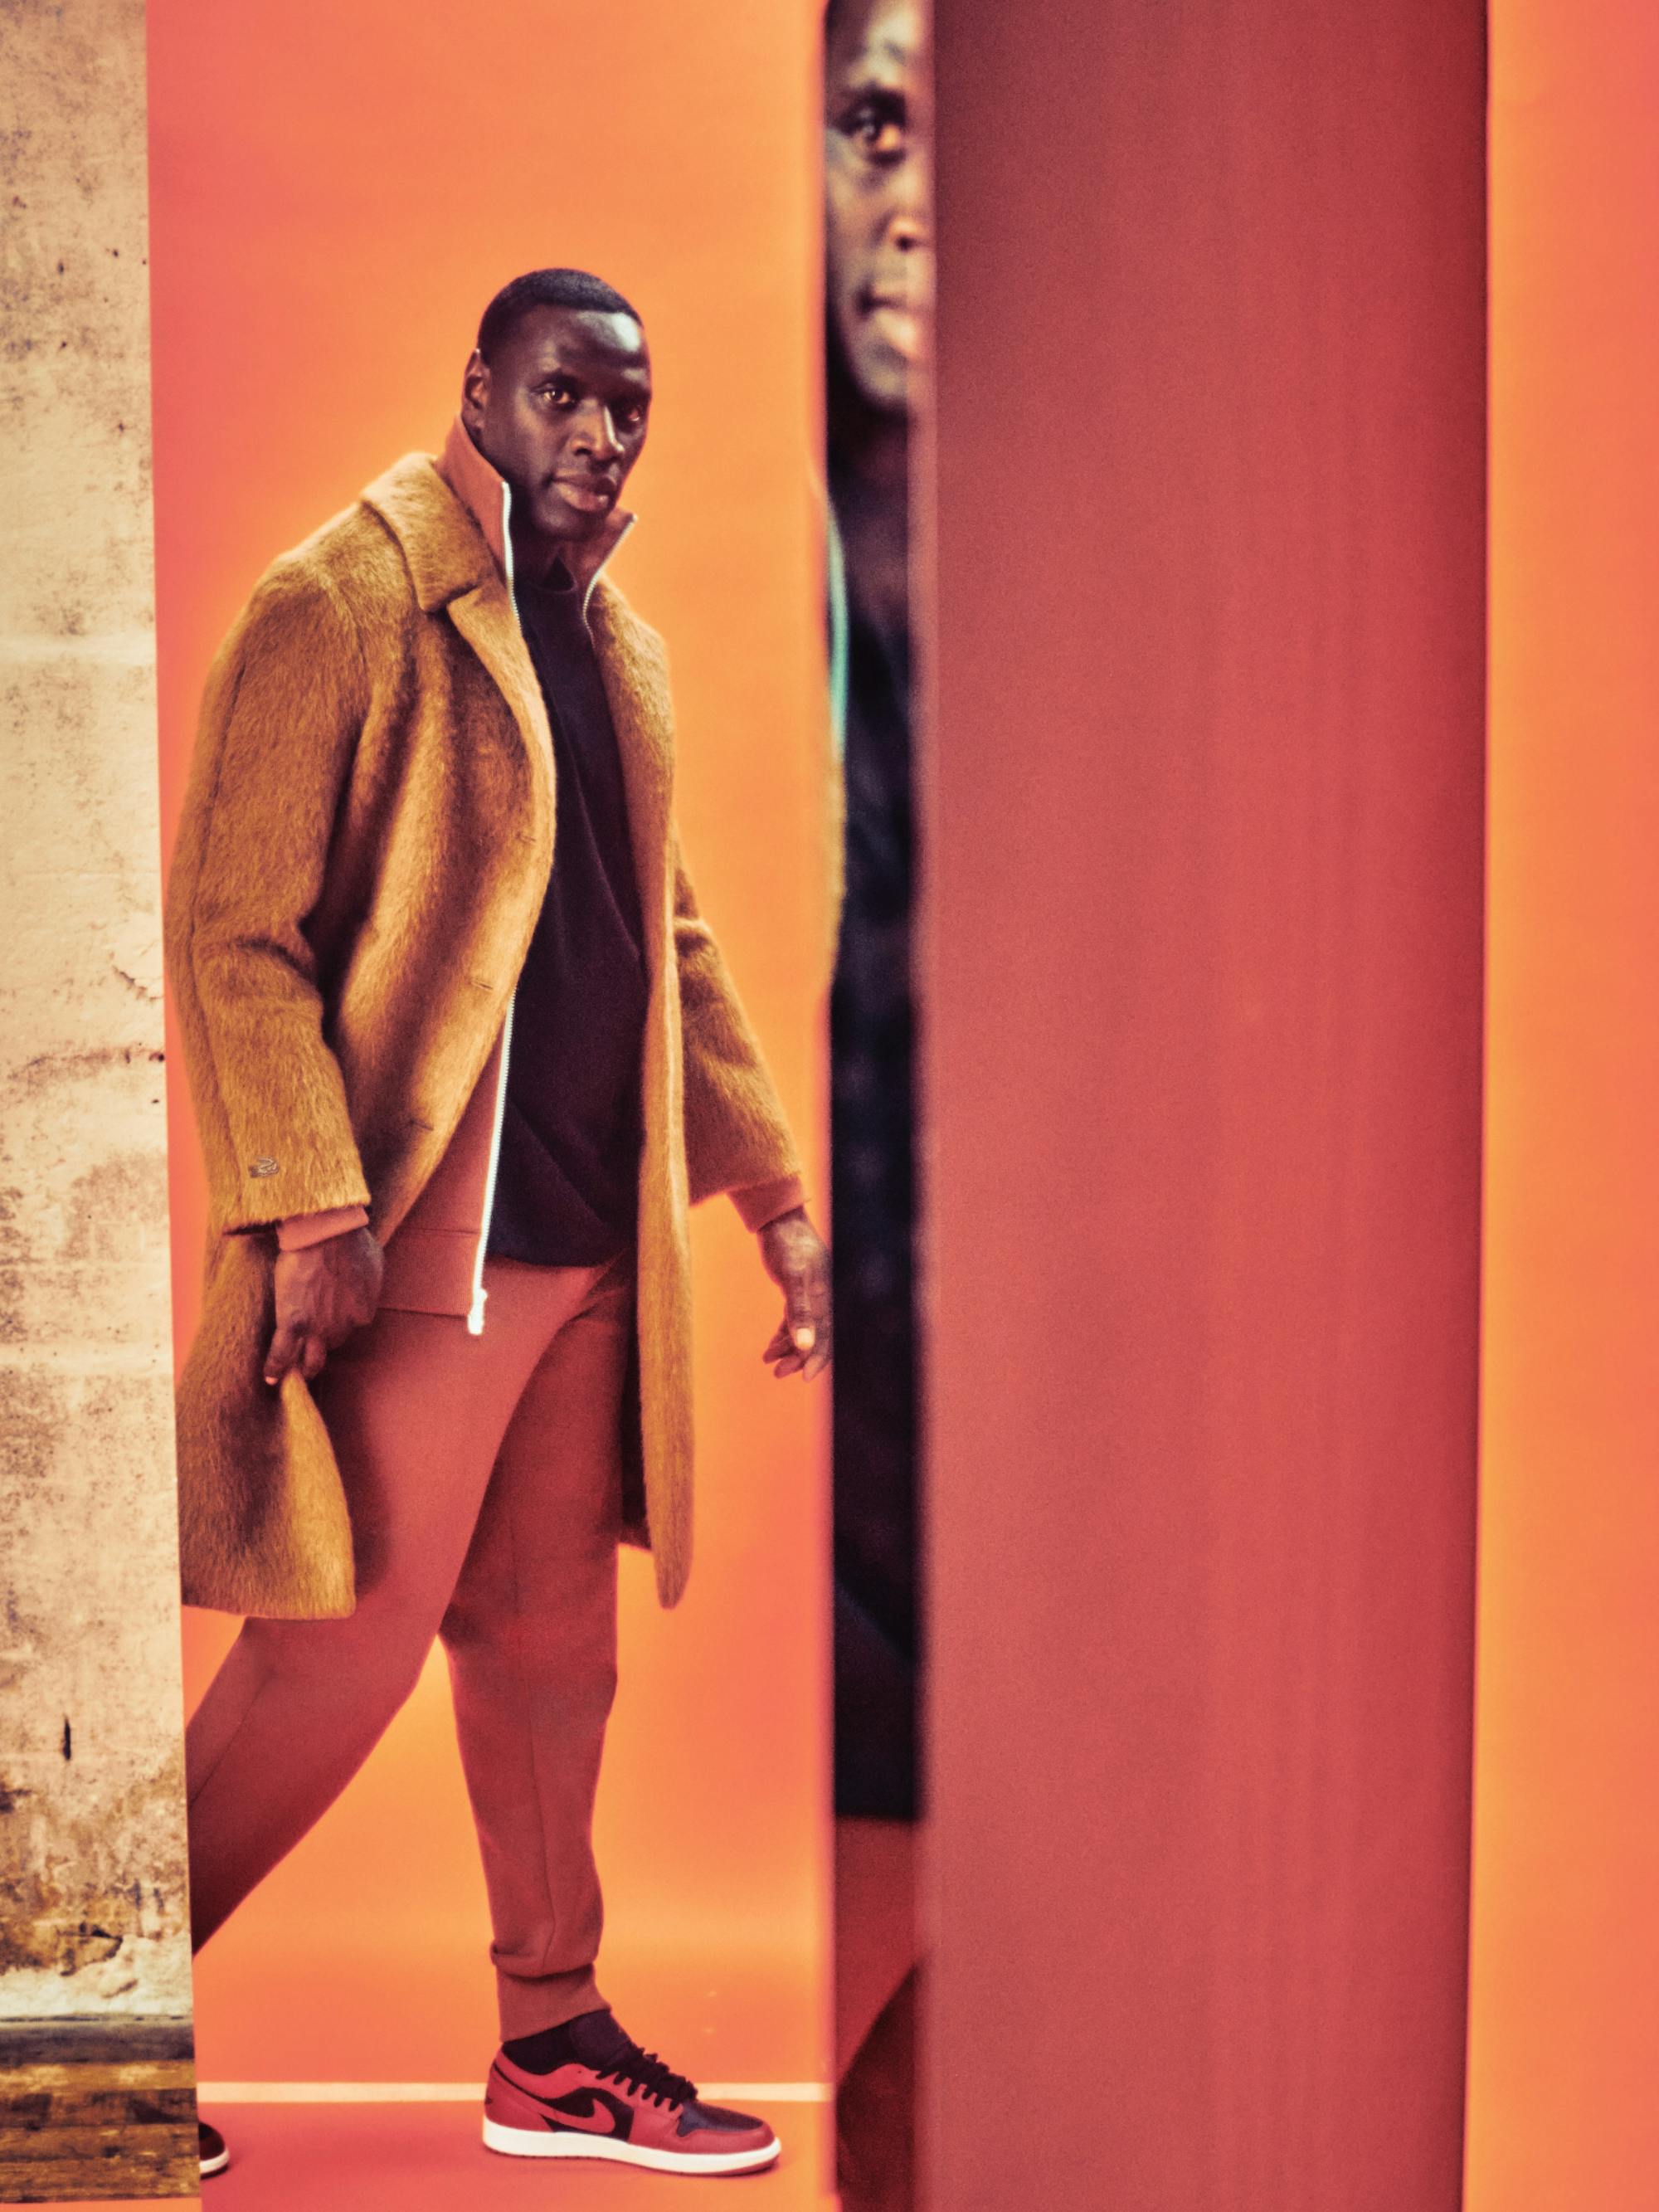 More reflections of Sy, this time in a long orange-brown coat and red Jordan 1s.